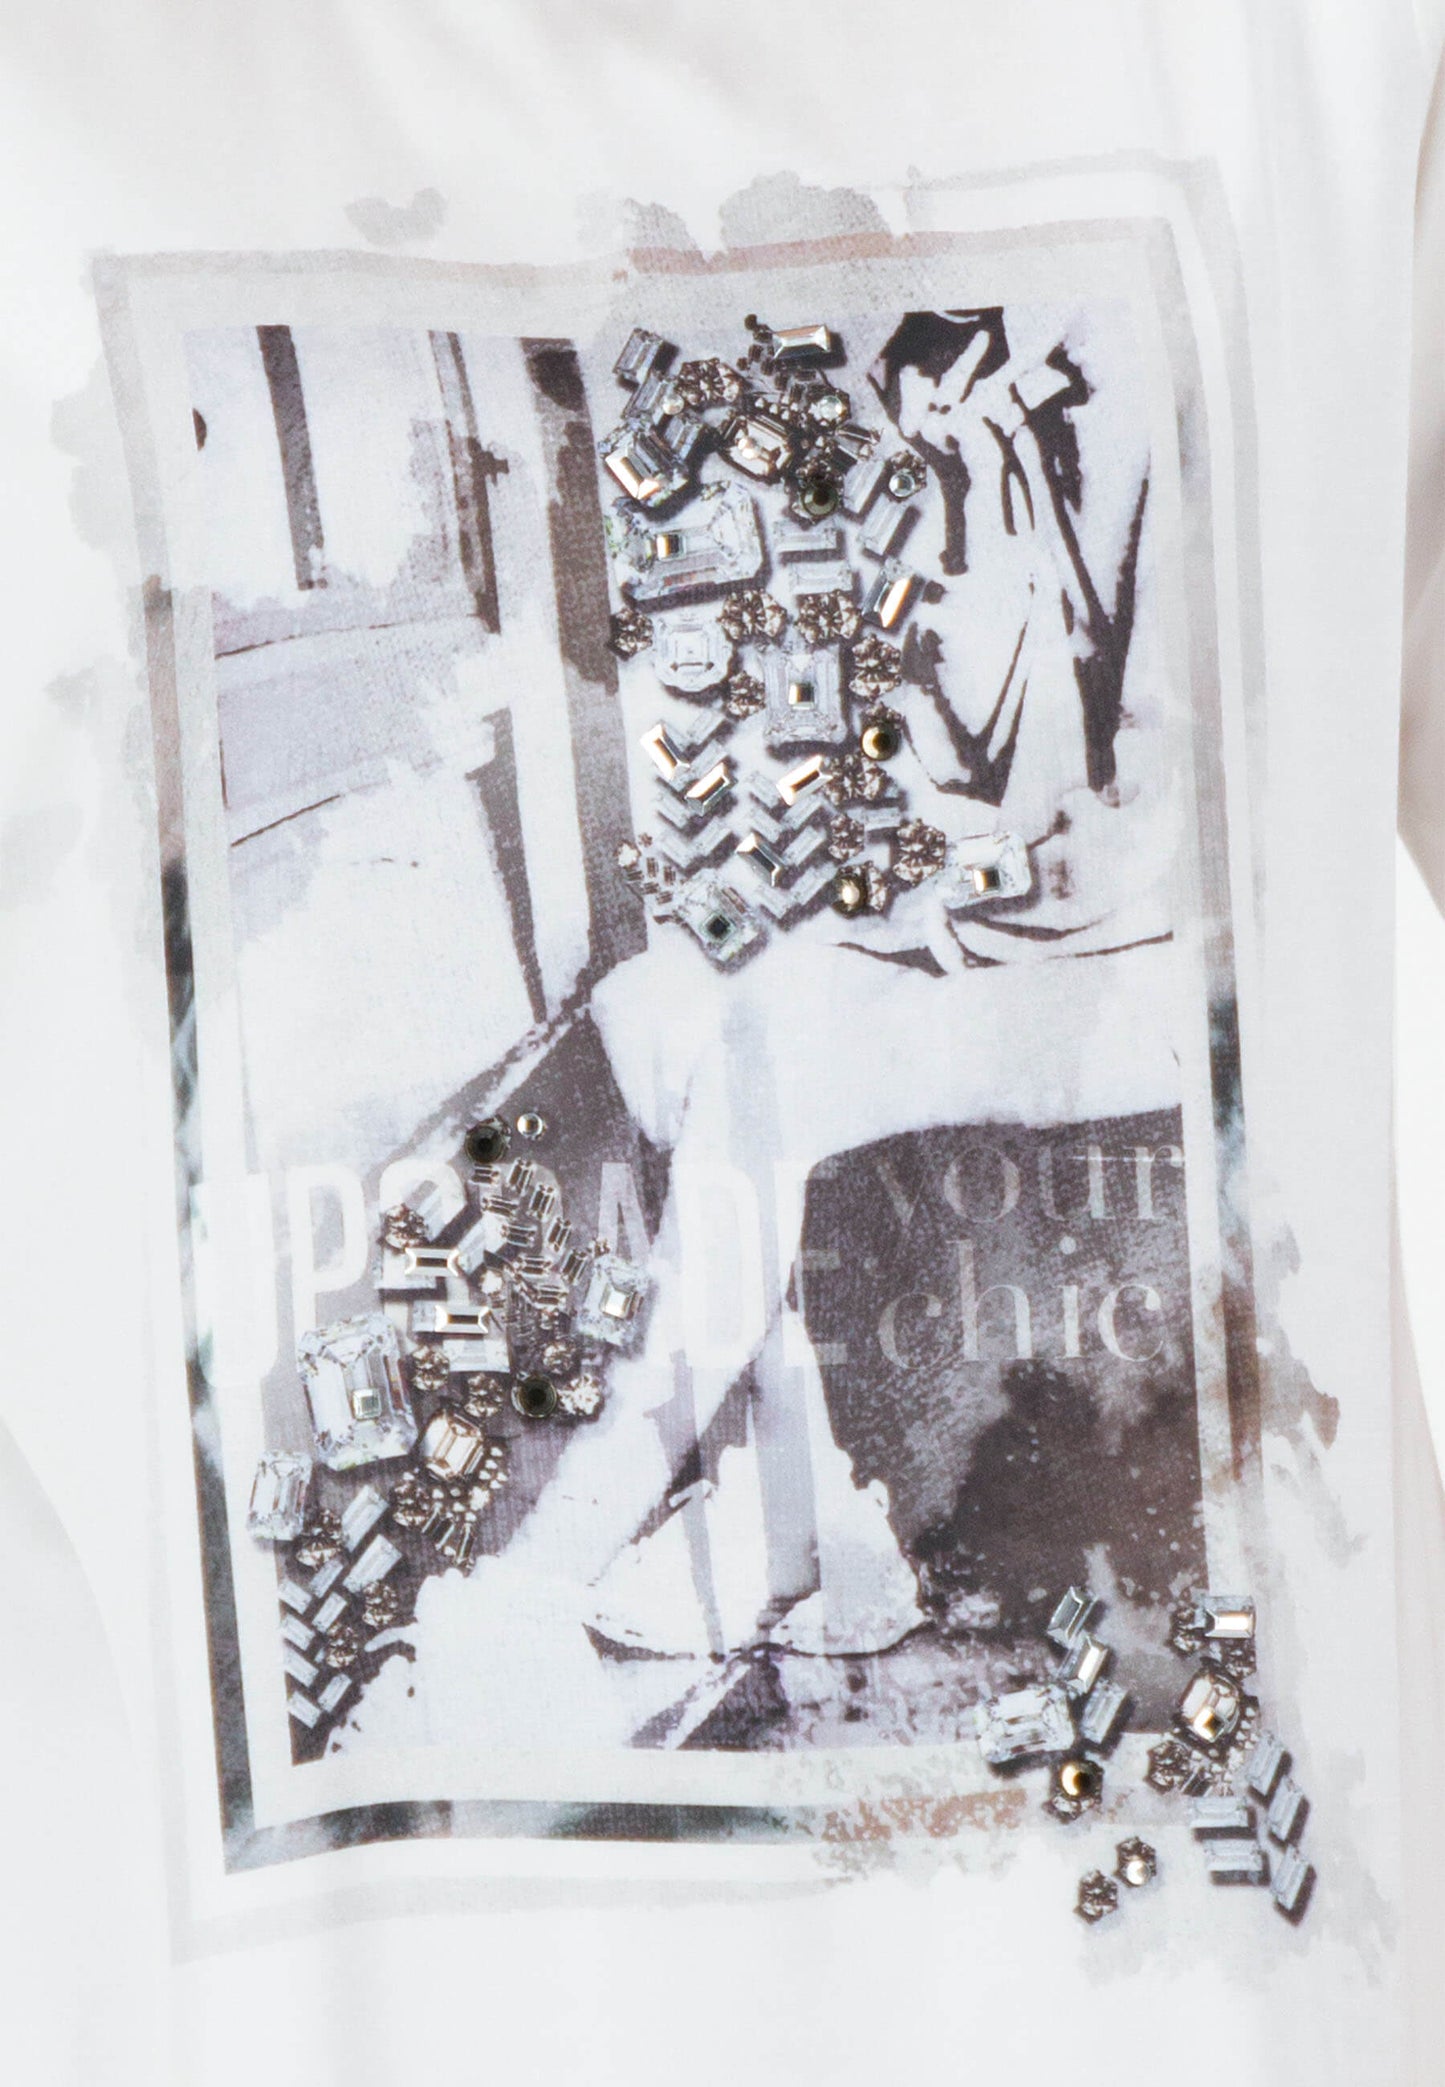 SE Just White Jewelled Front T-Shirt